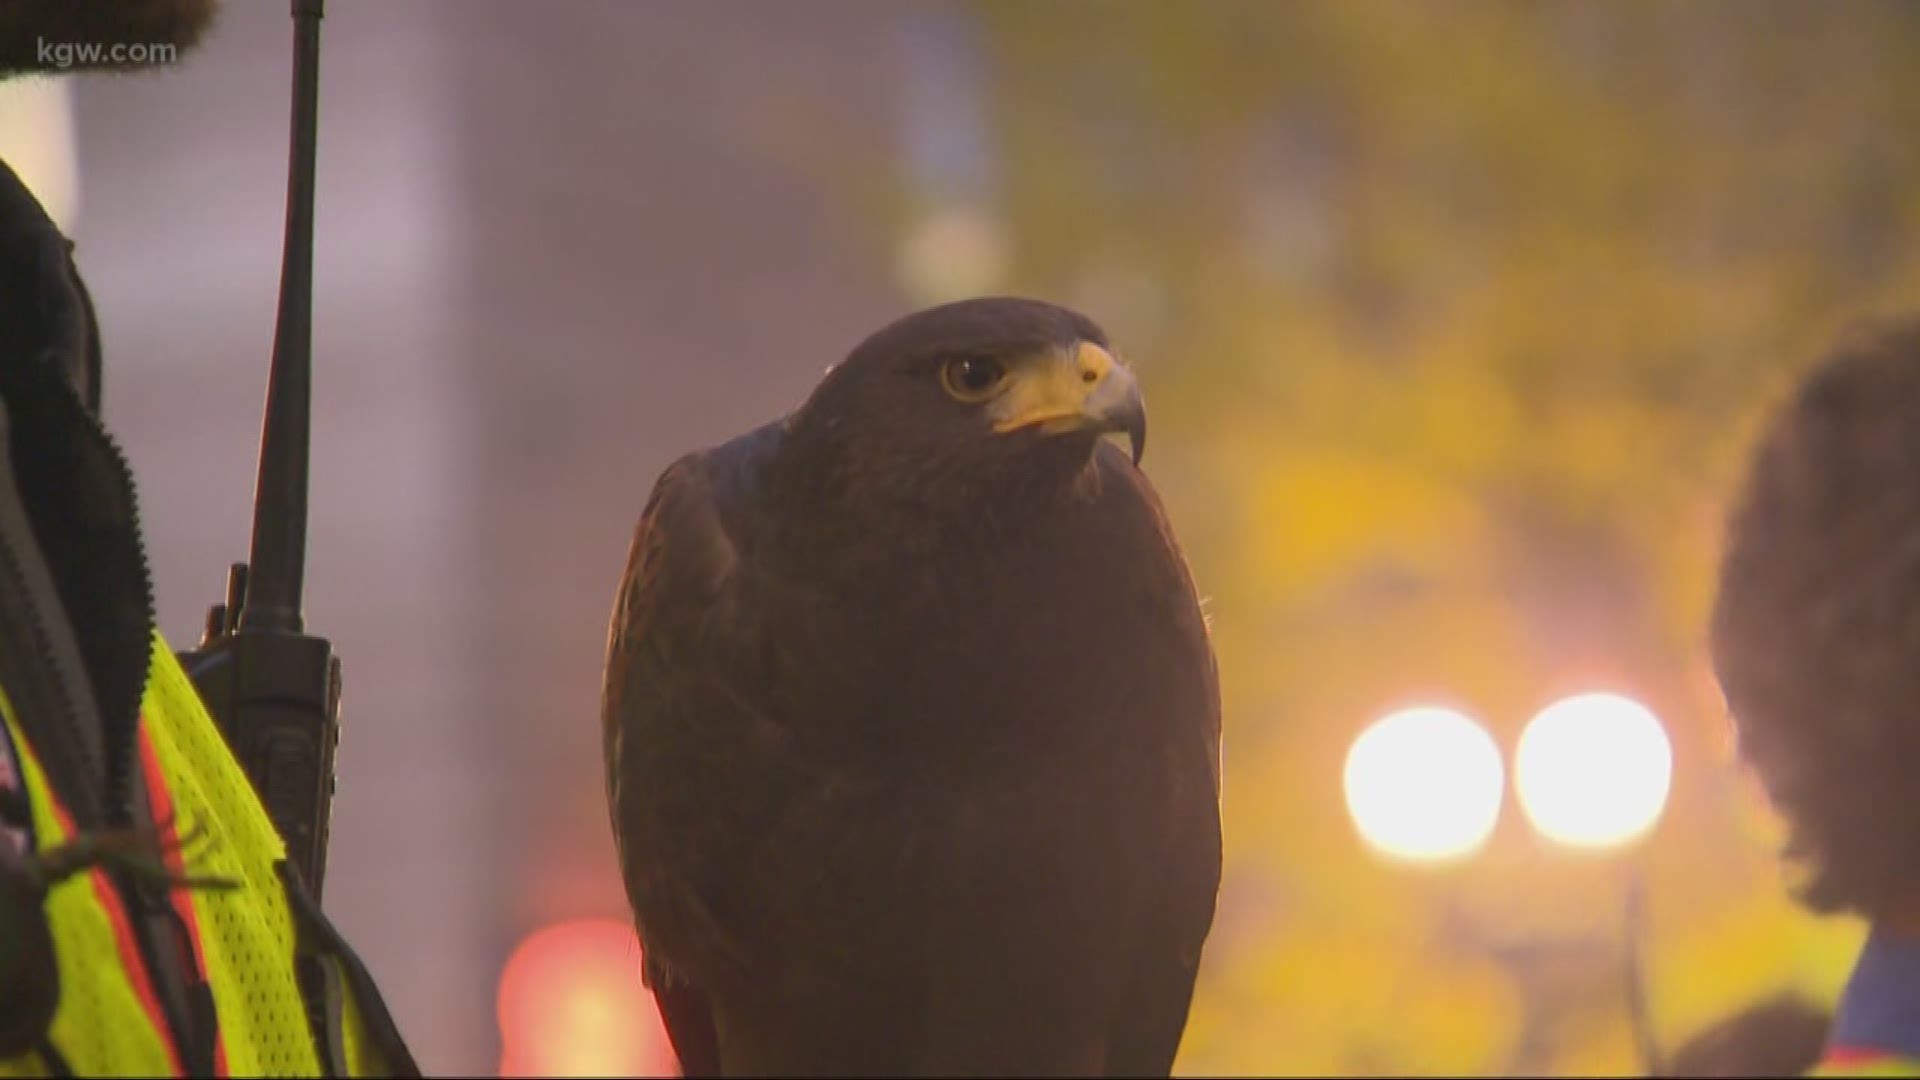 A big crowd turned out in Portland Tuesday night to see how the city clears the trees of crows. The city hires falconers to bring in hawks to chase the crows away.